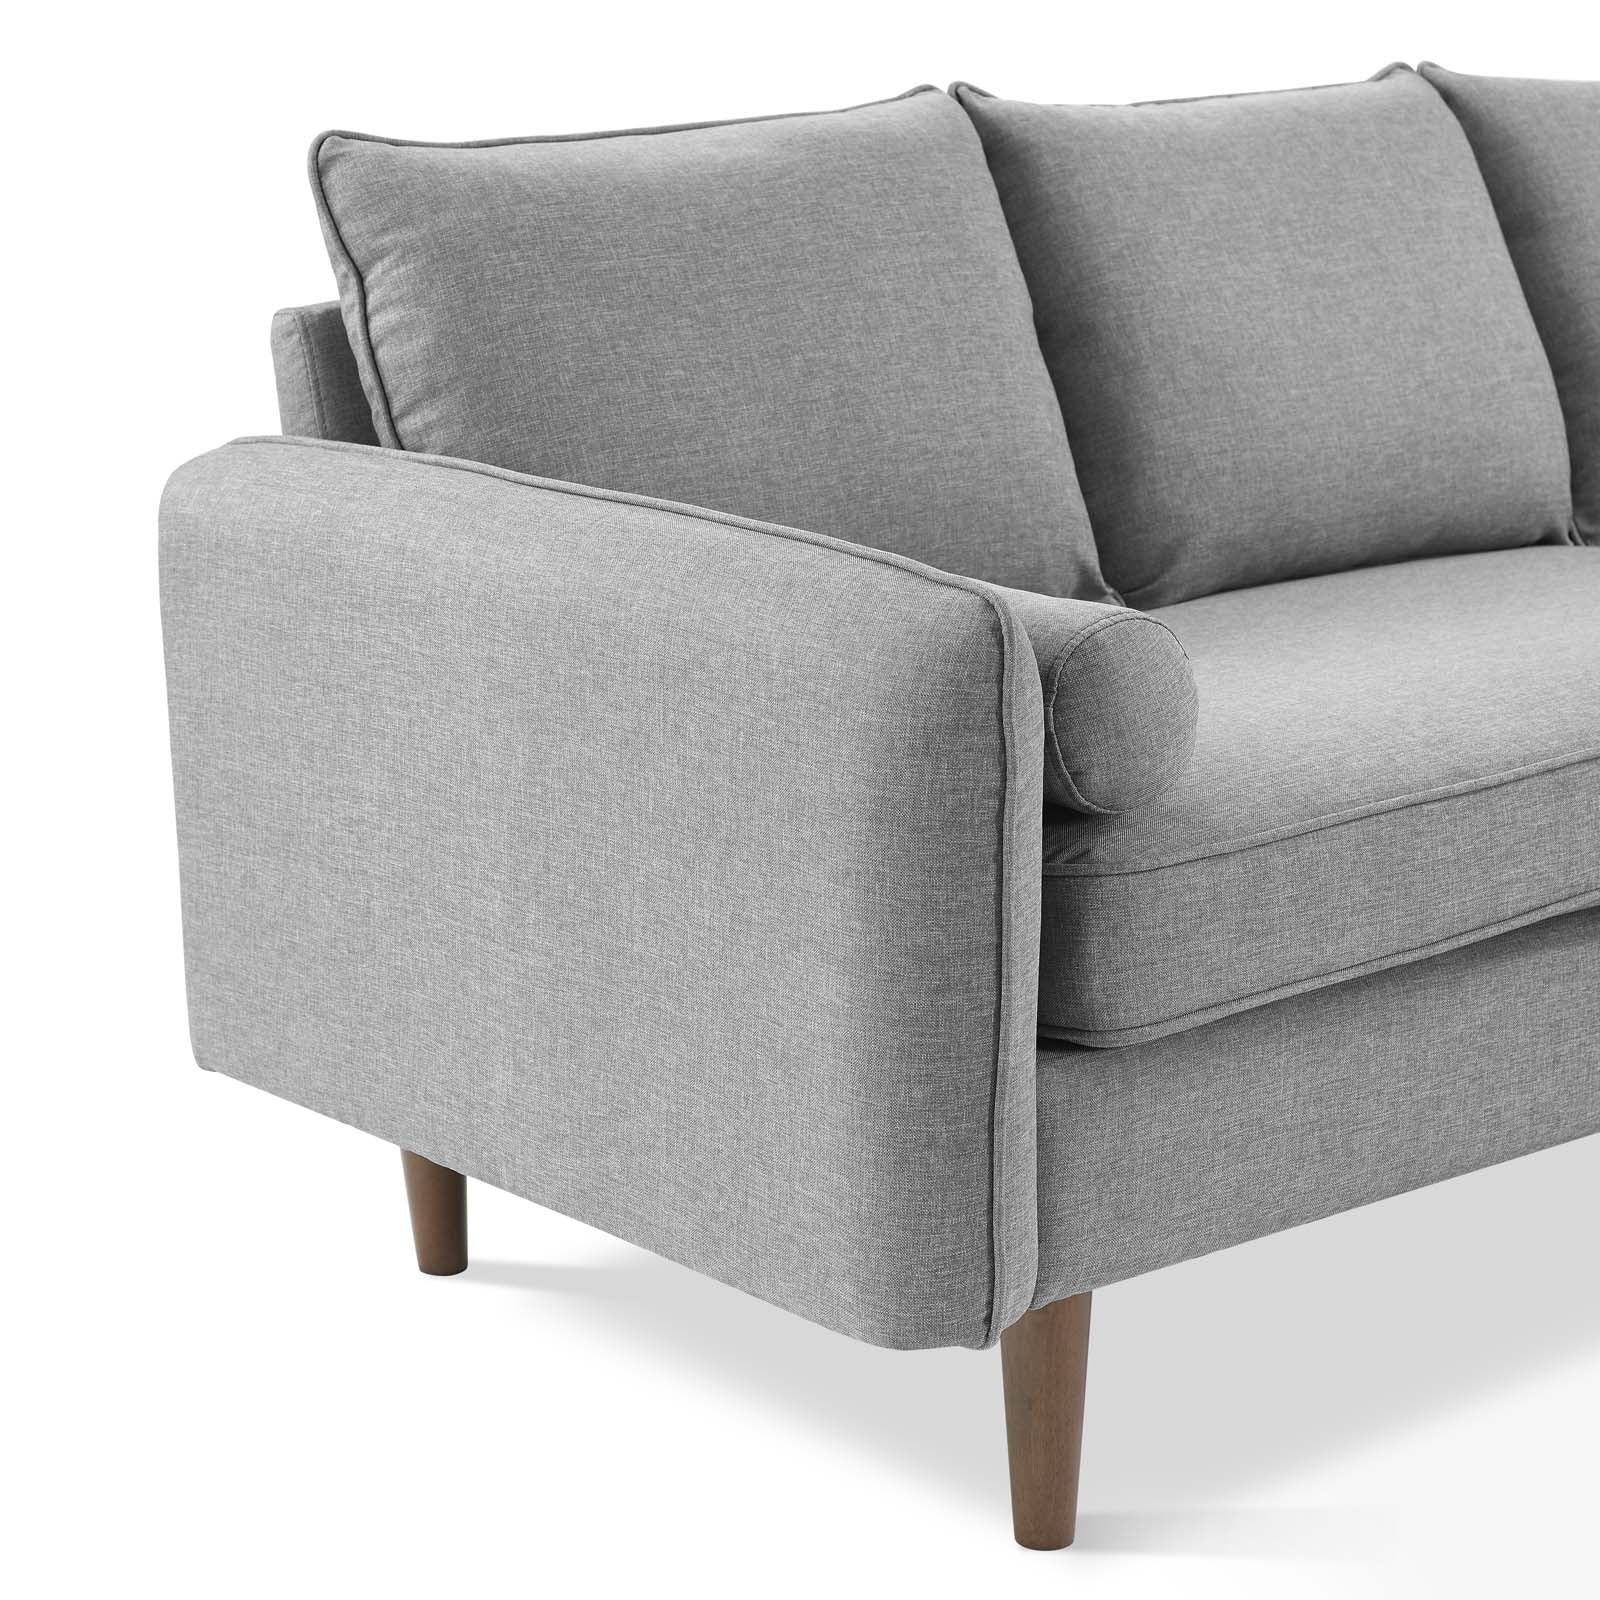 Revive Upholstered Convertible Sectional Sofa - East Shore Modern Home Furnishings